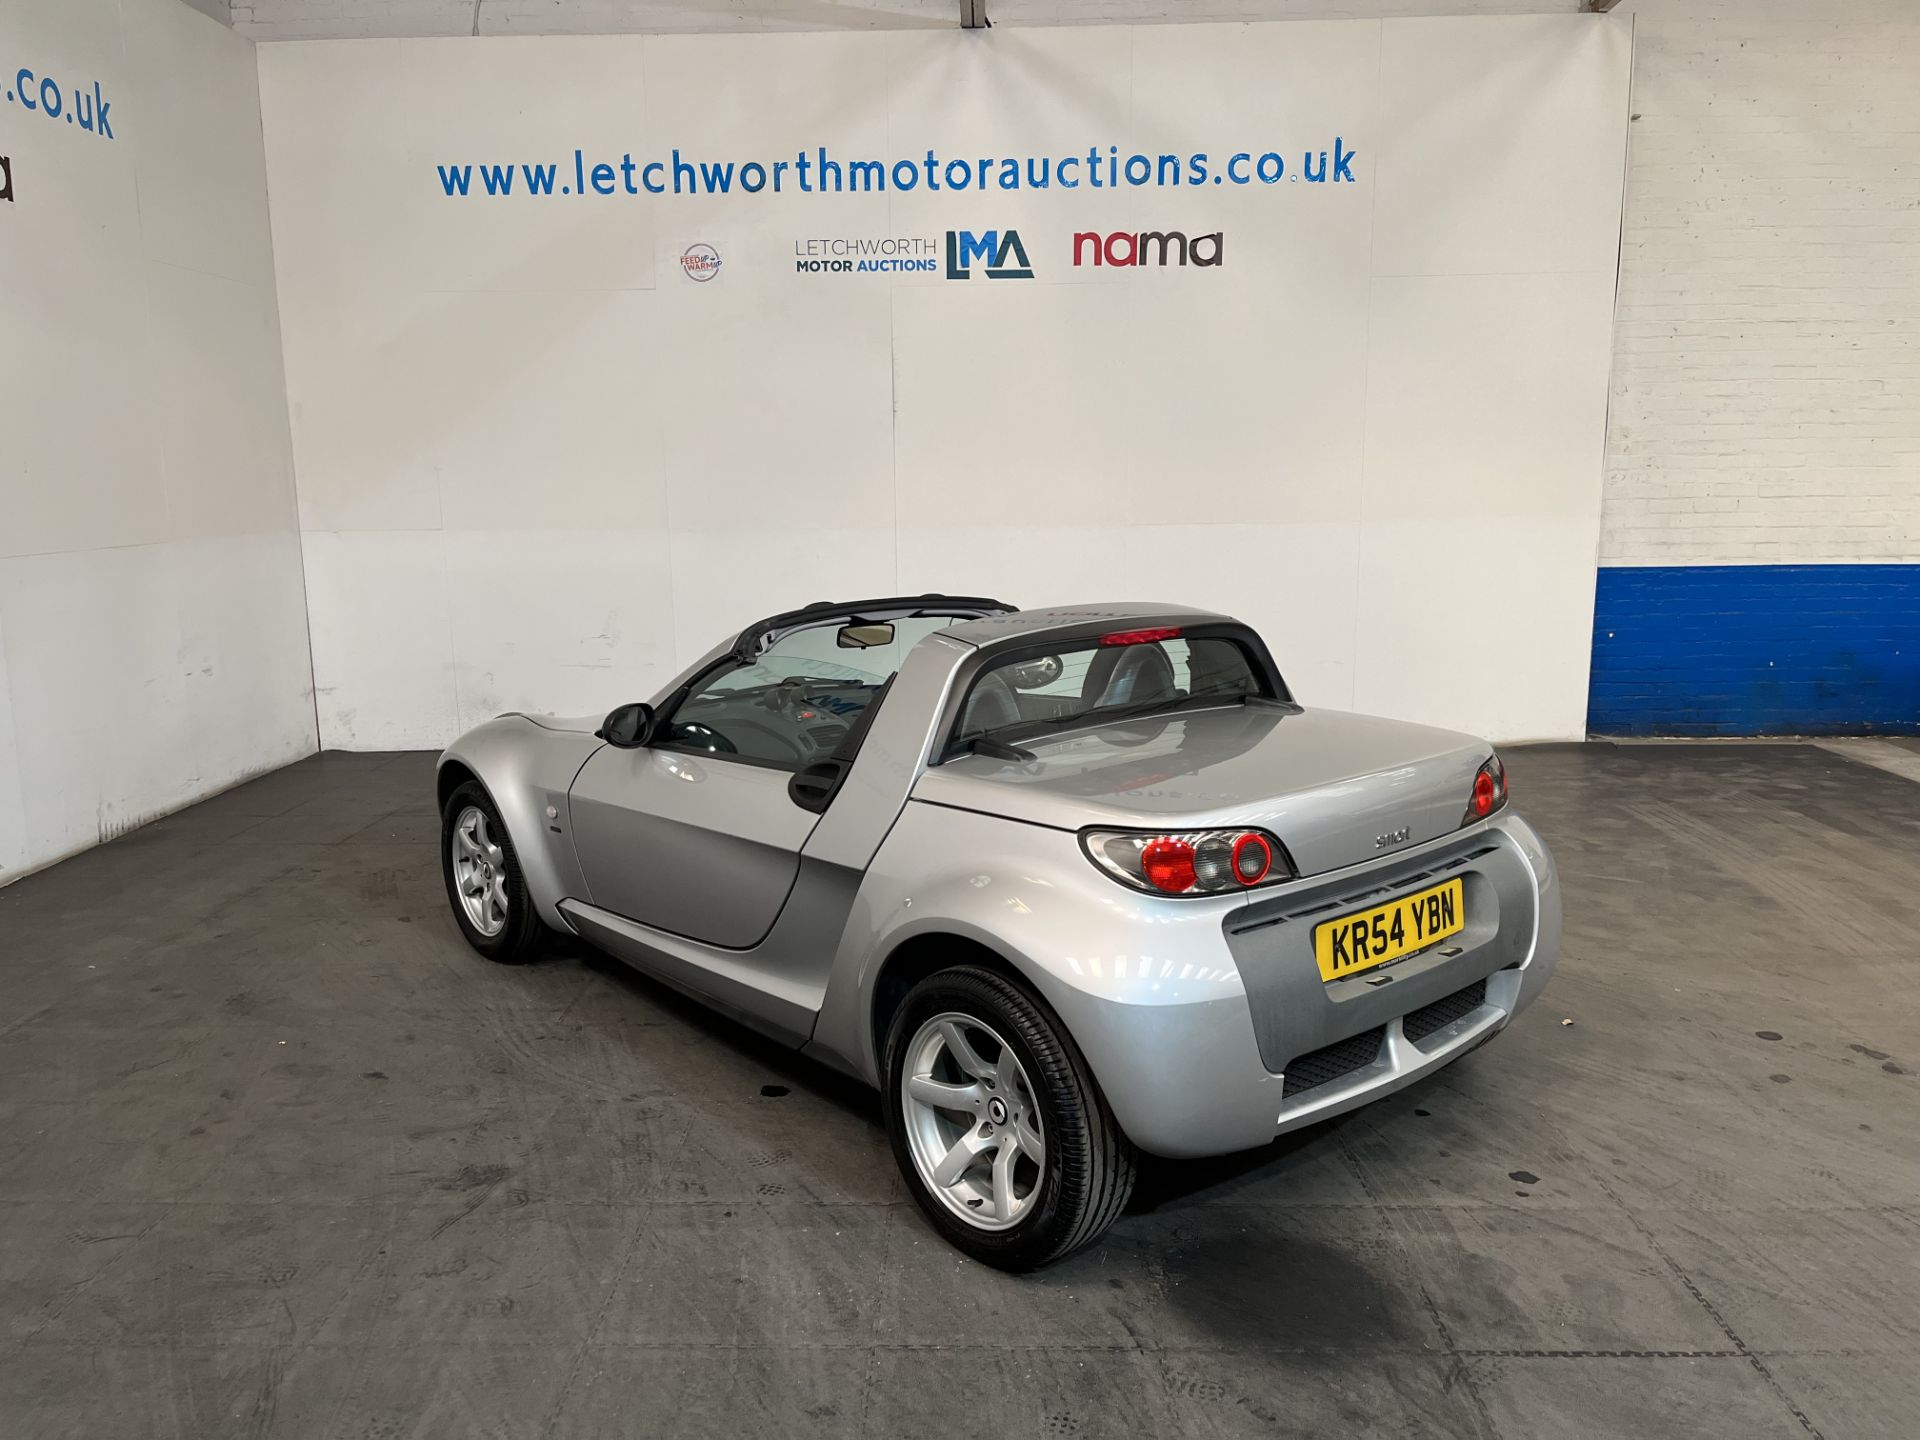 2004 Smart Roadster Speedsilver Auto - 698cc - Image 7 of 22